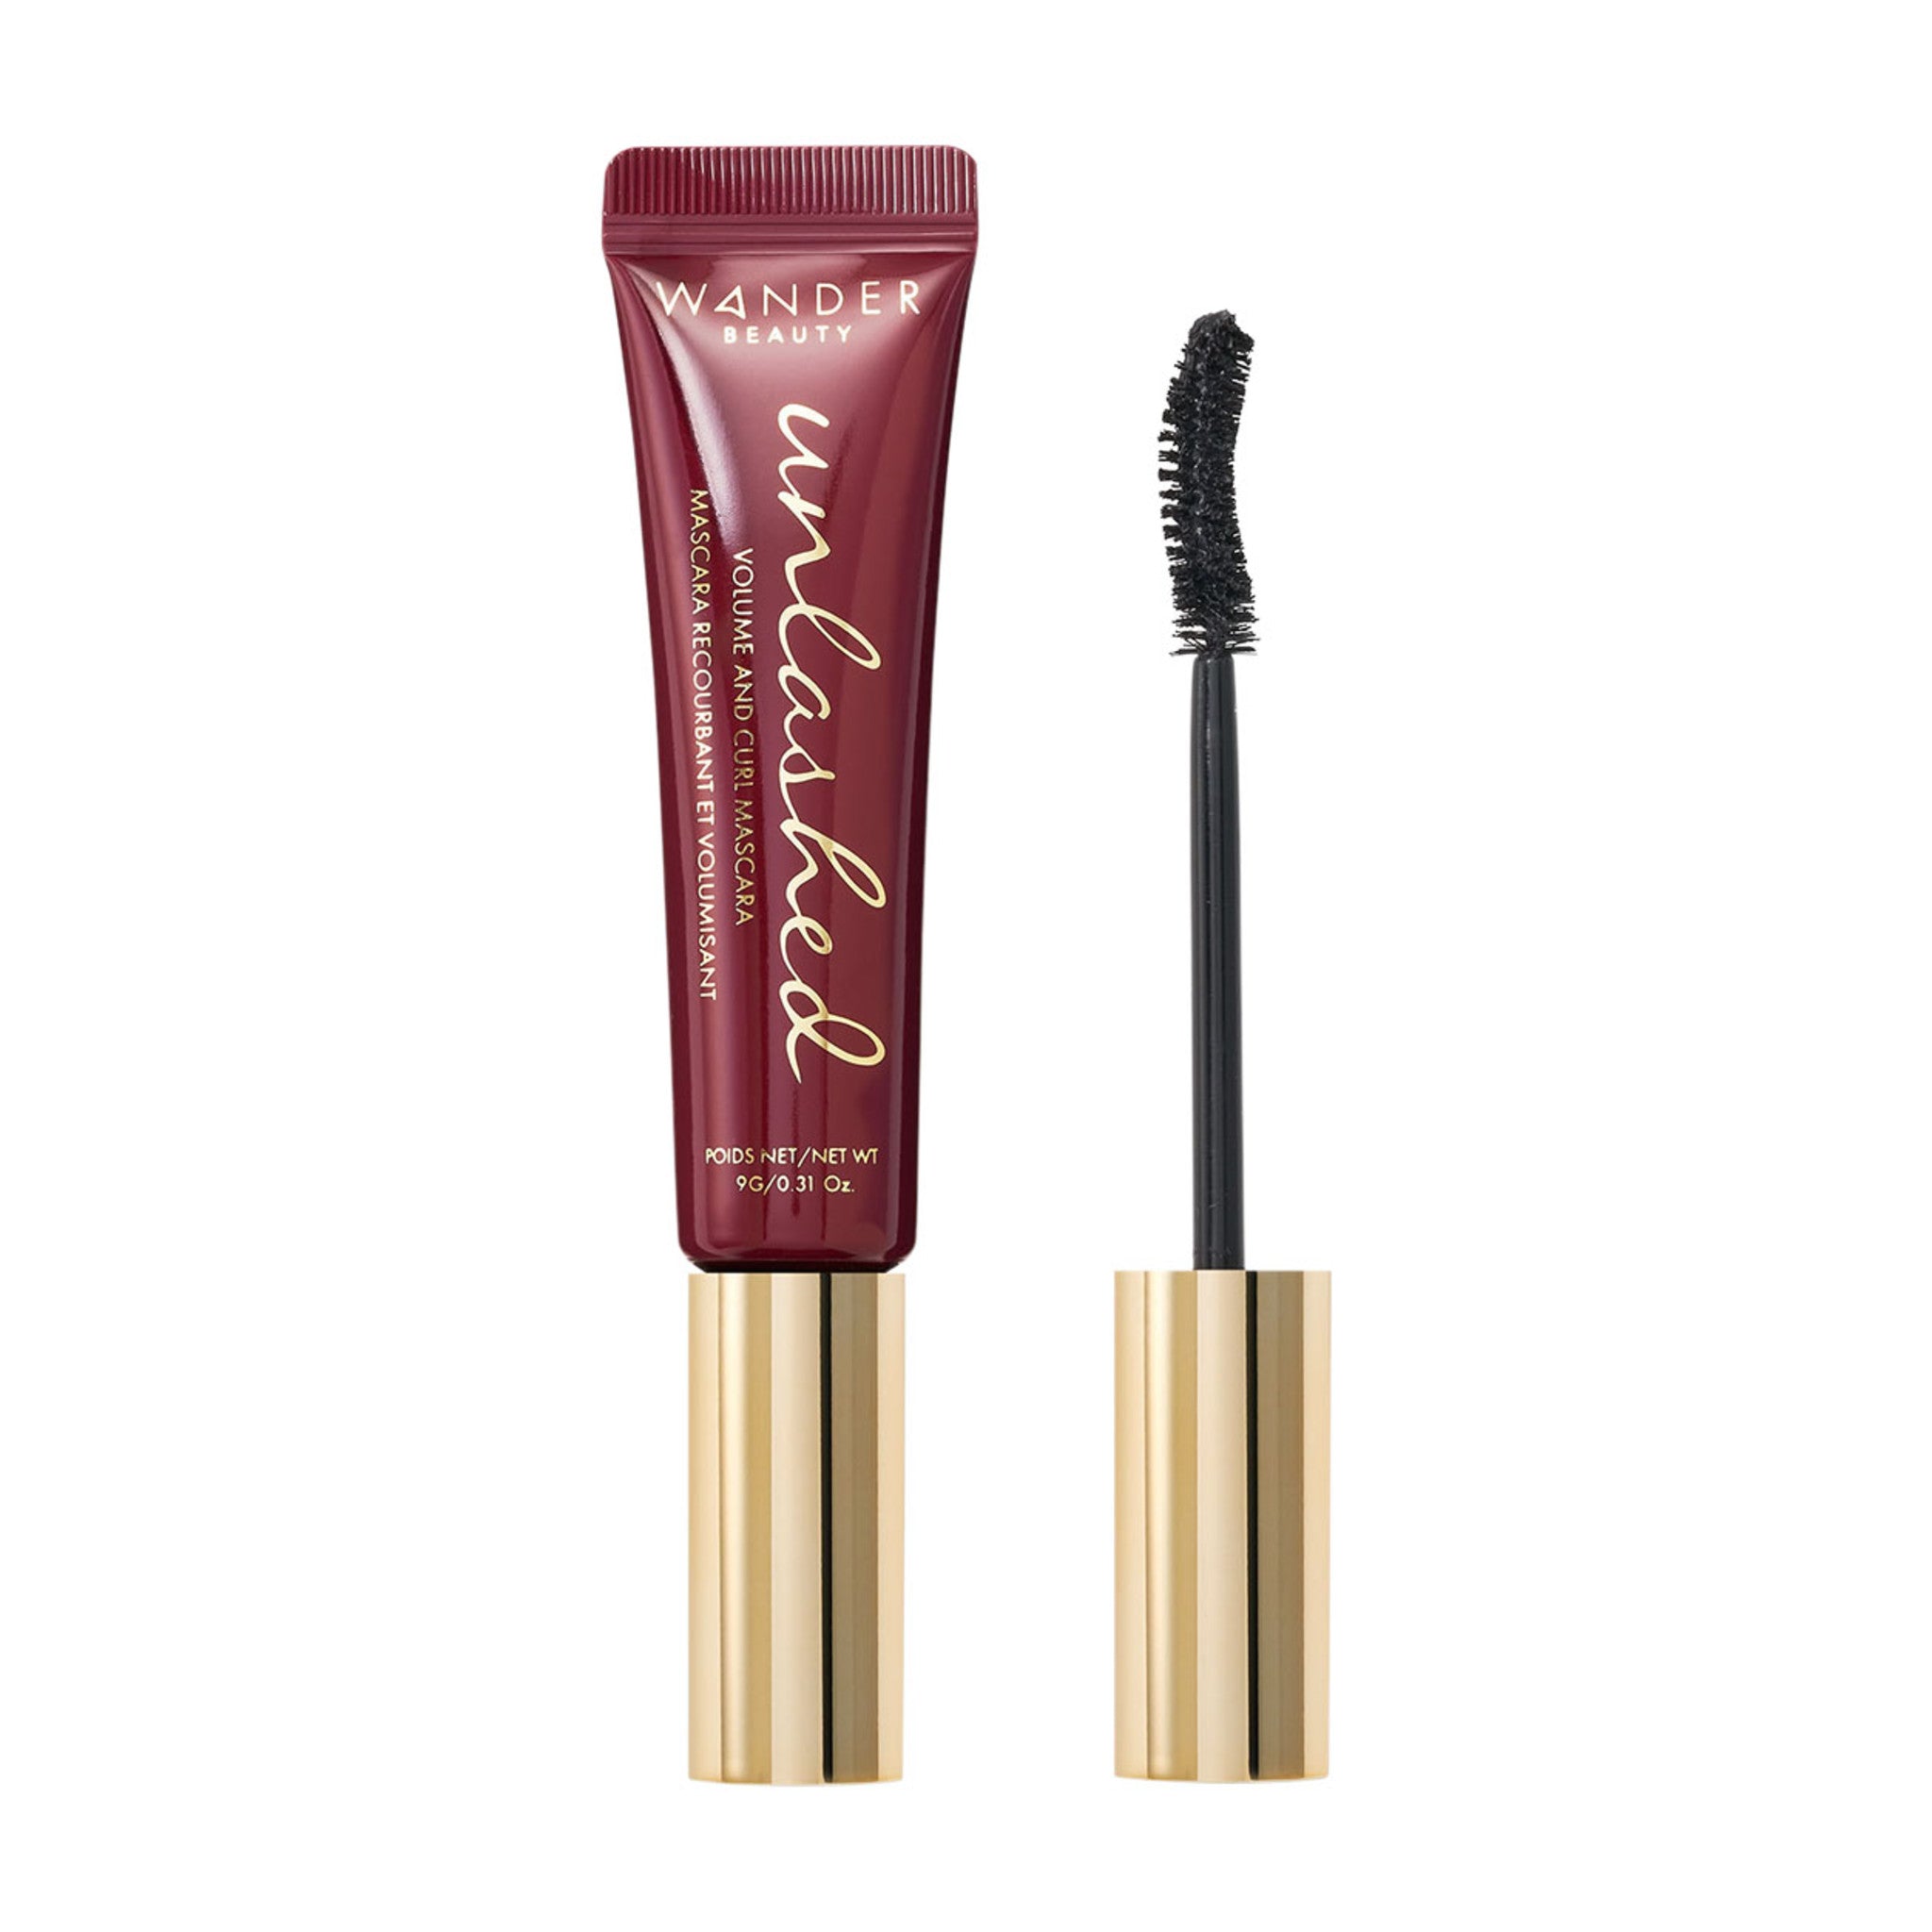 Limited edition Wander Beauty Unlashed Volume and Curl Mascara main image. This product is in the color black